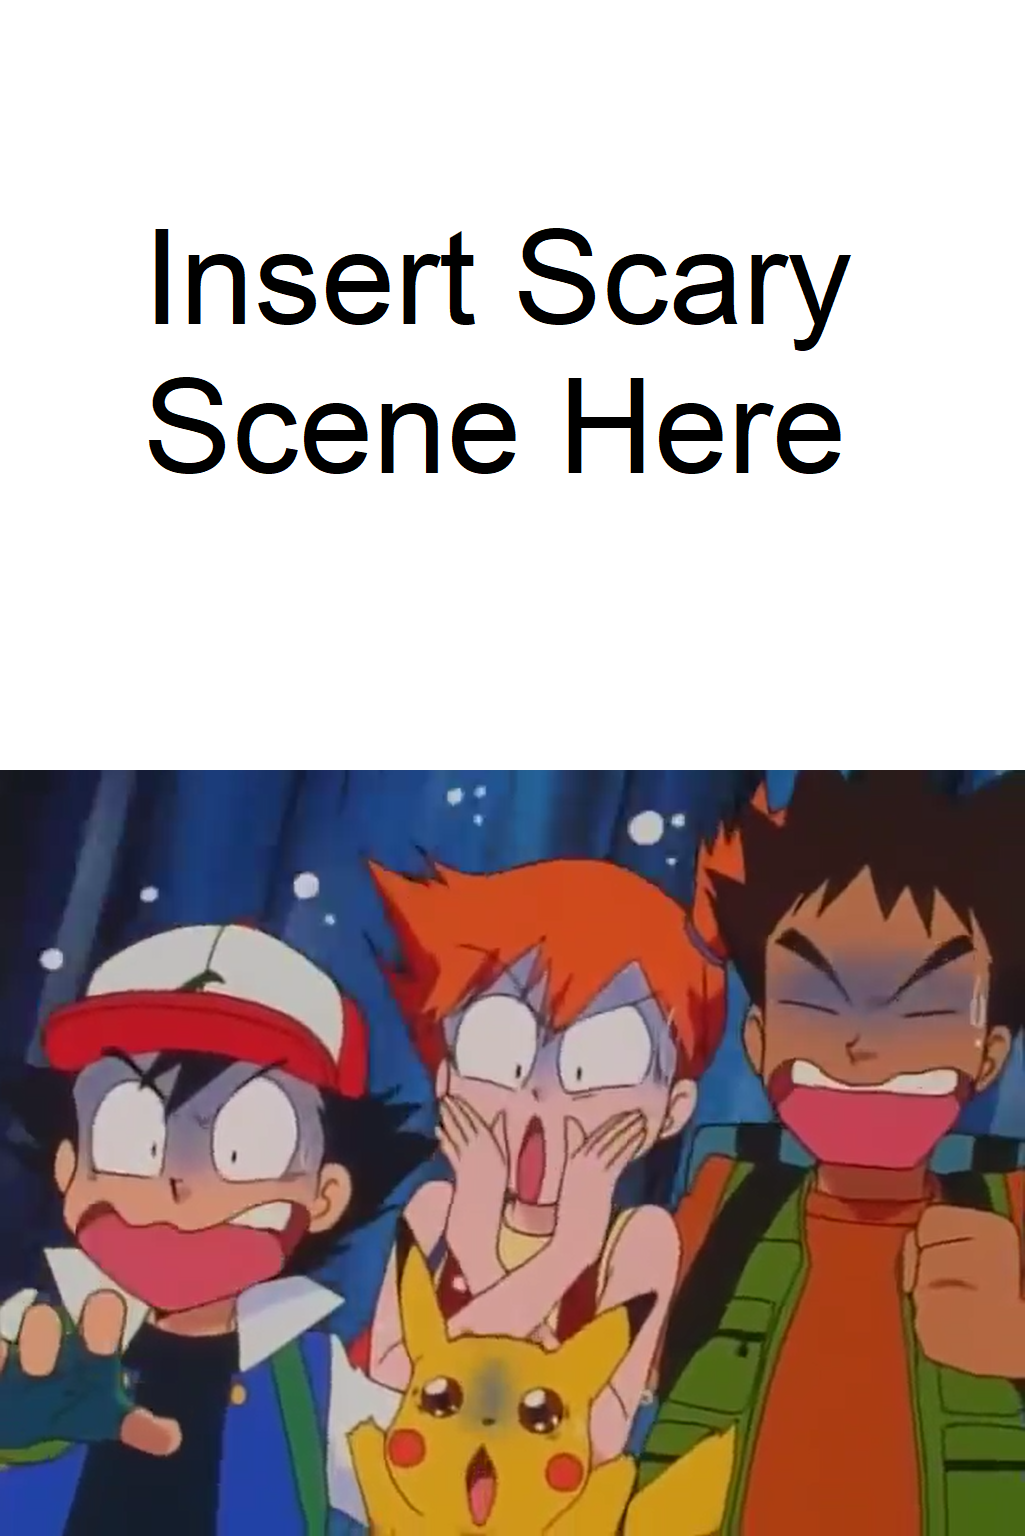 High Quality ash and the gang scared of what scary scene Blank Meme Template